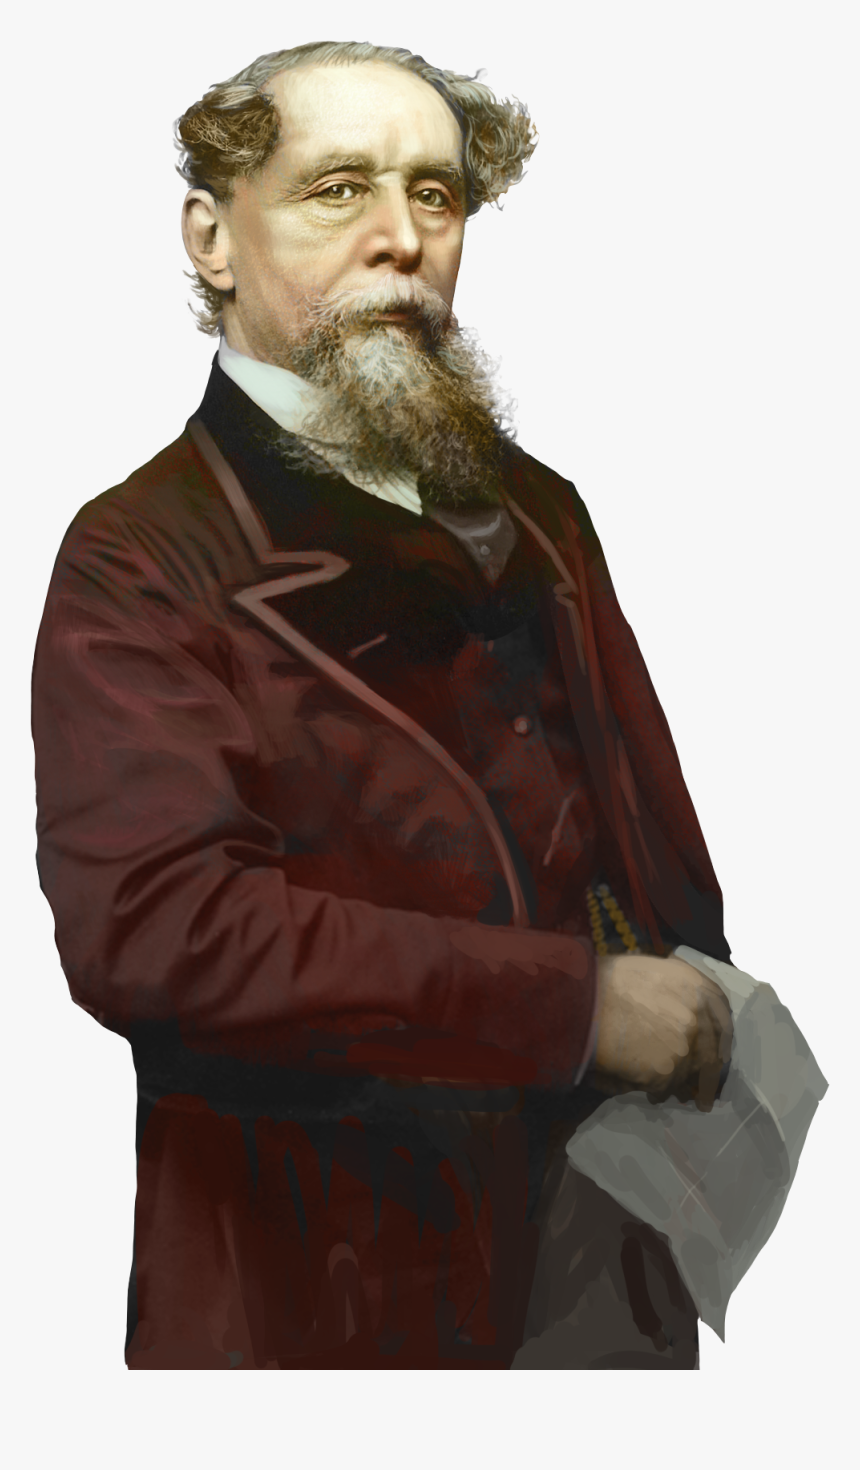 Charles Dickens Image In Png, Transparent Png, Free Download